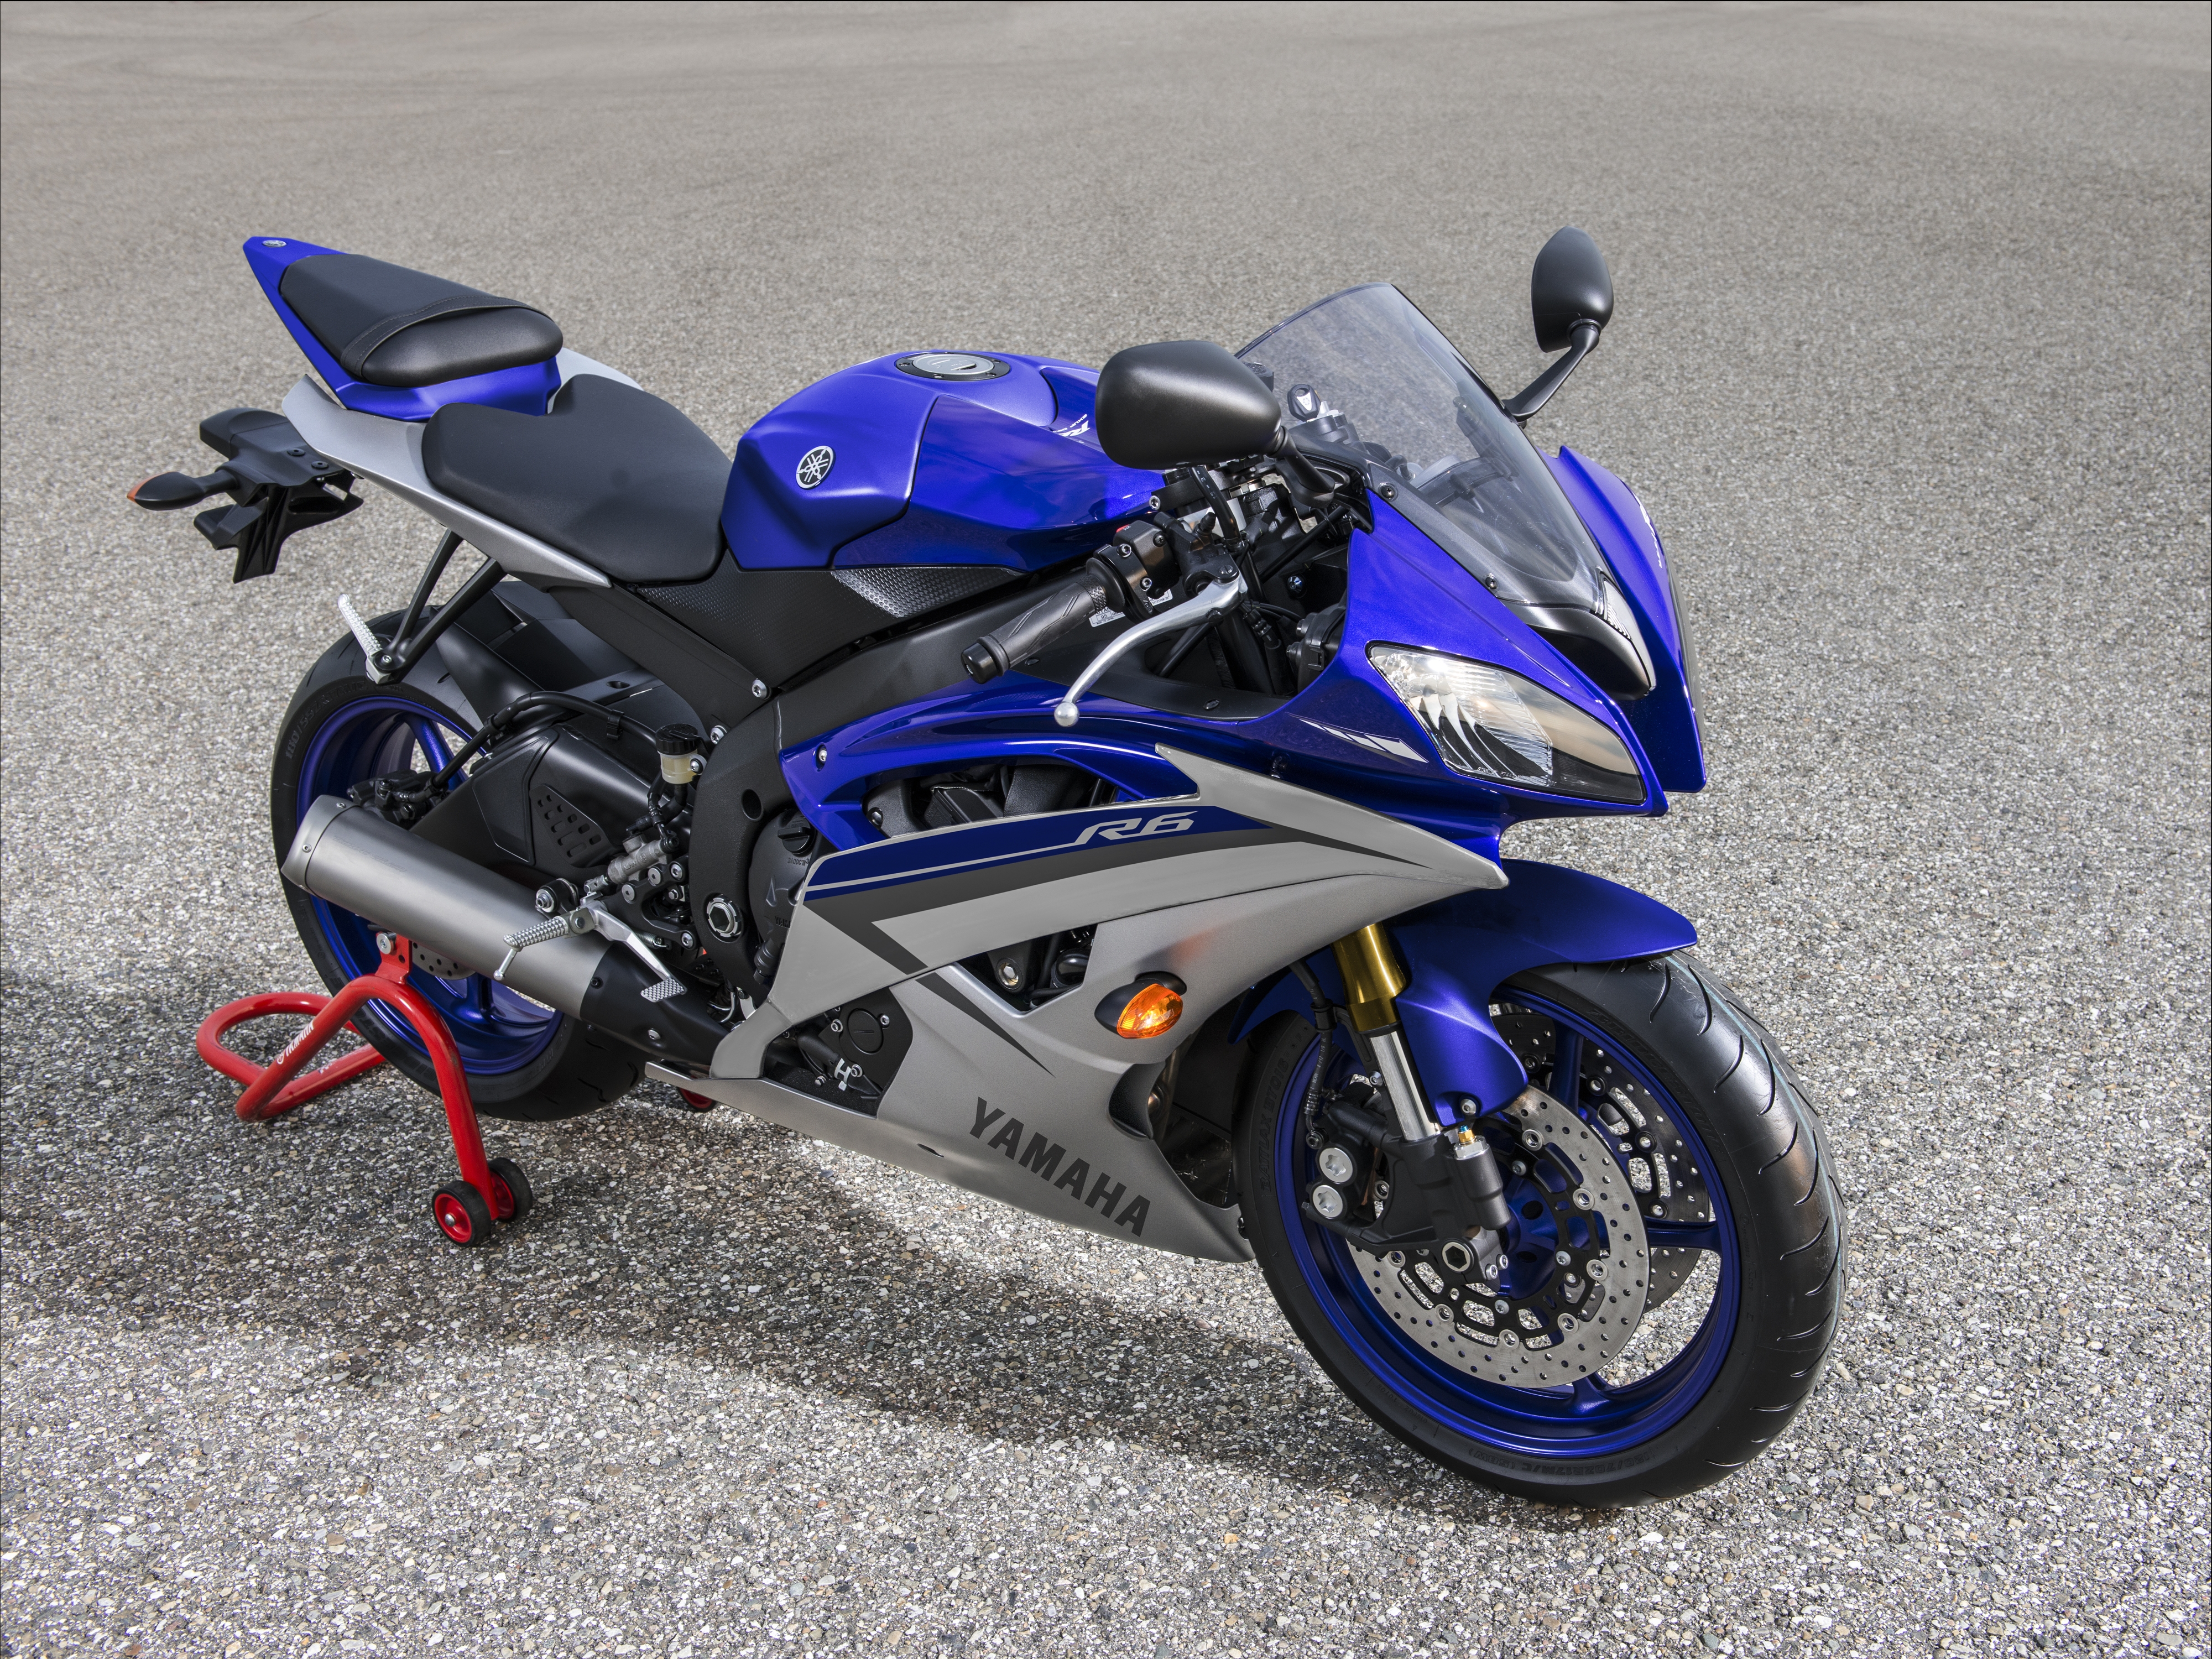 New colours for Yamaha R6 and R125